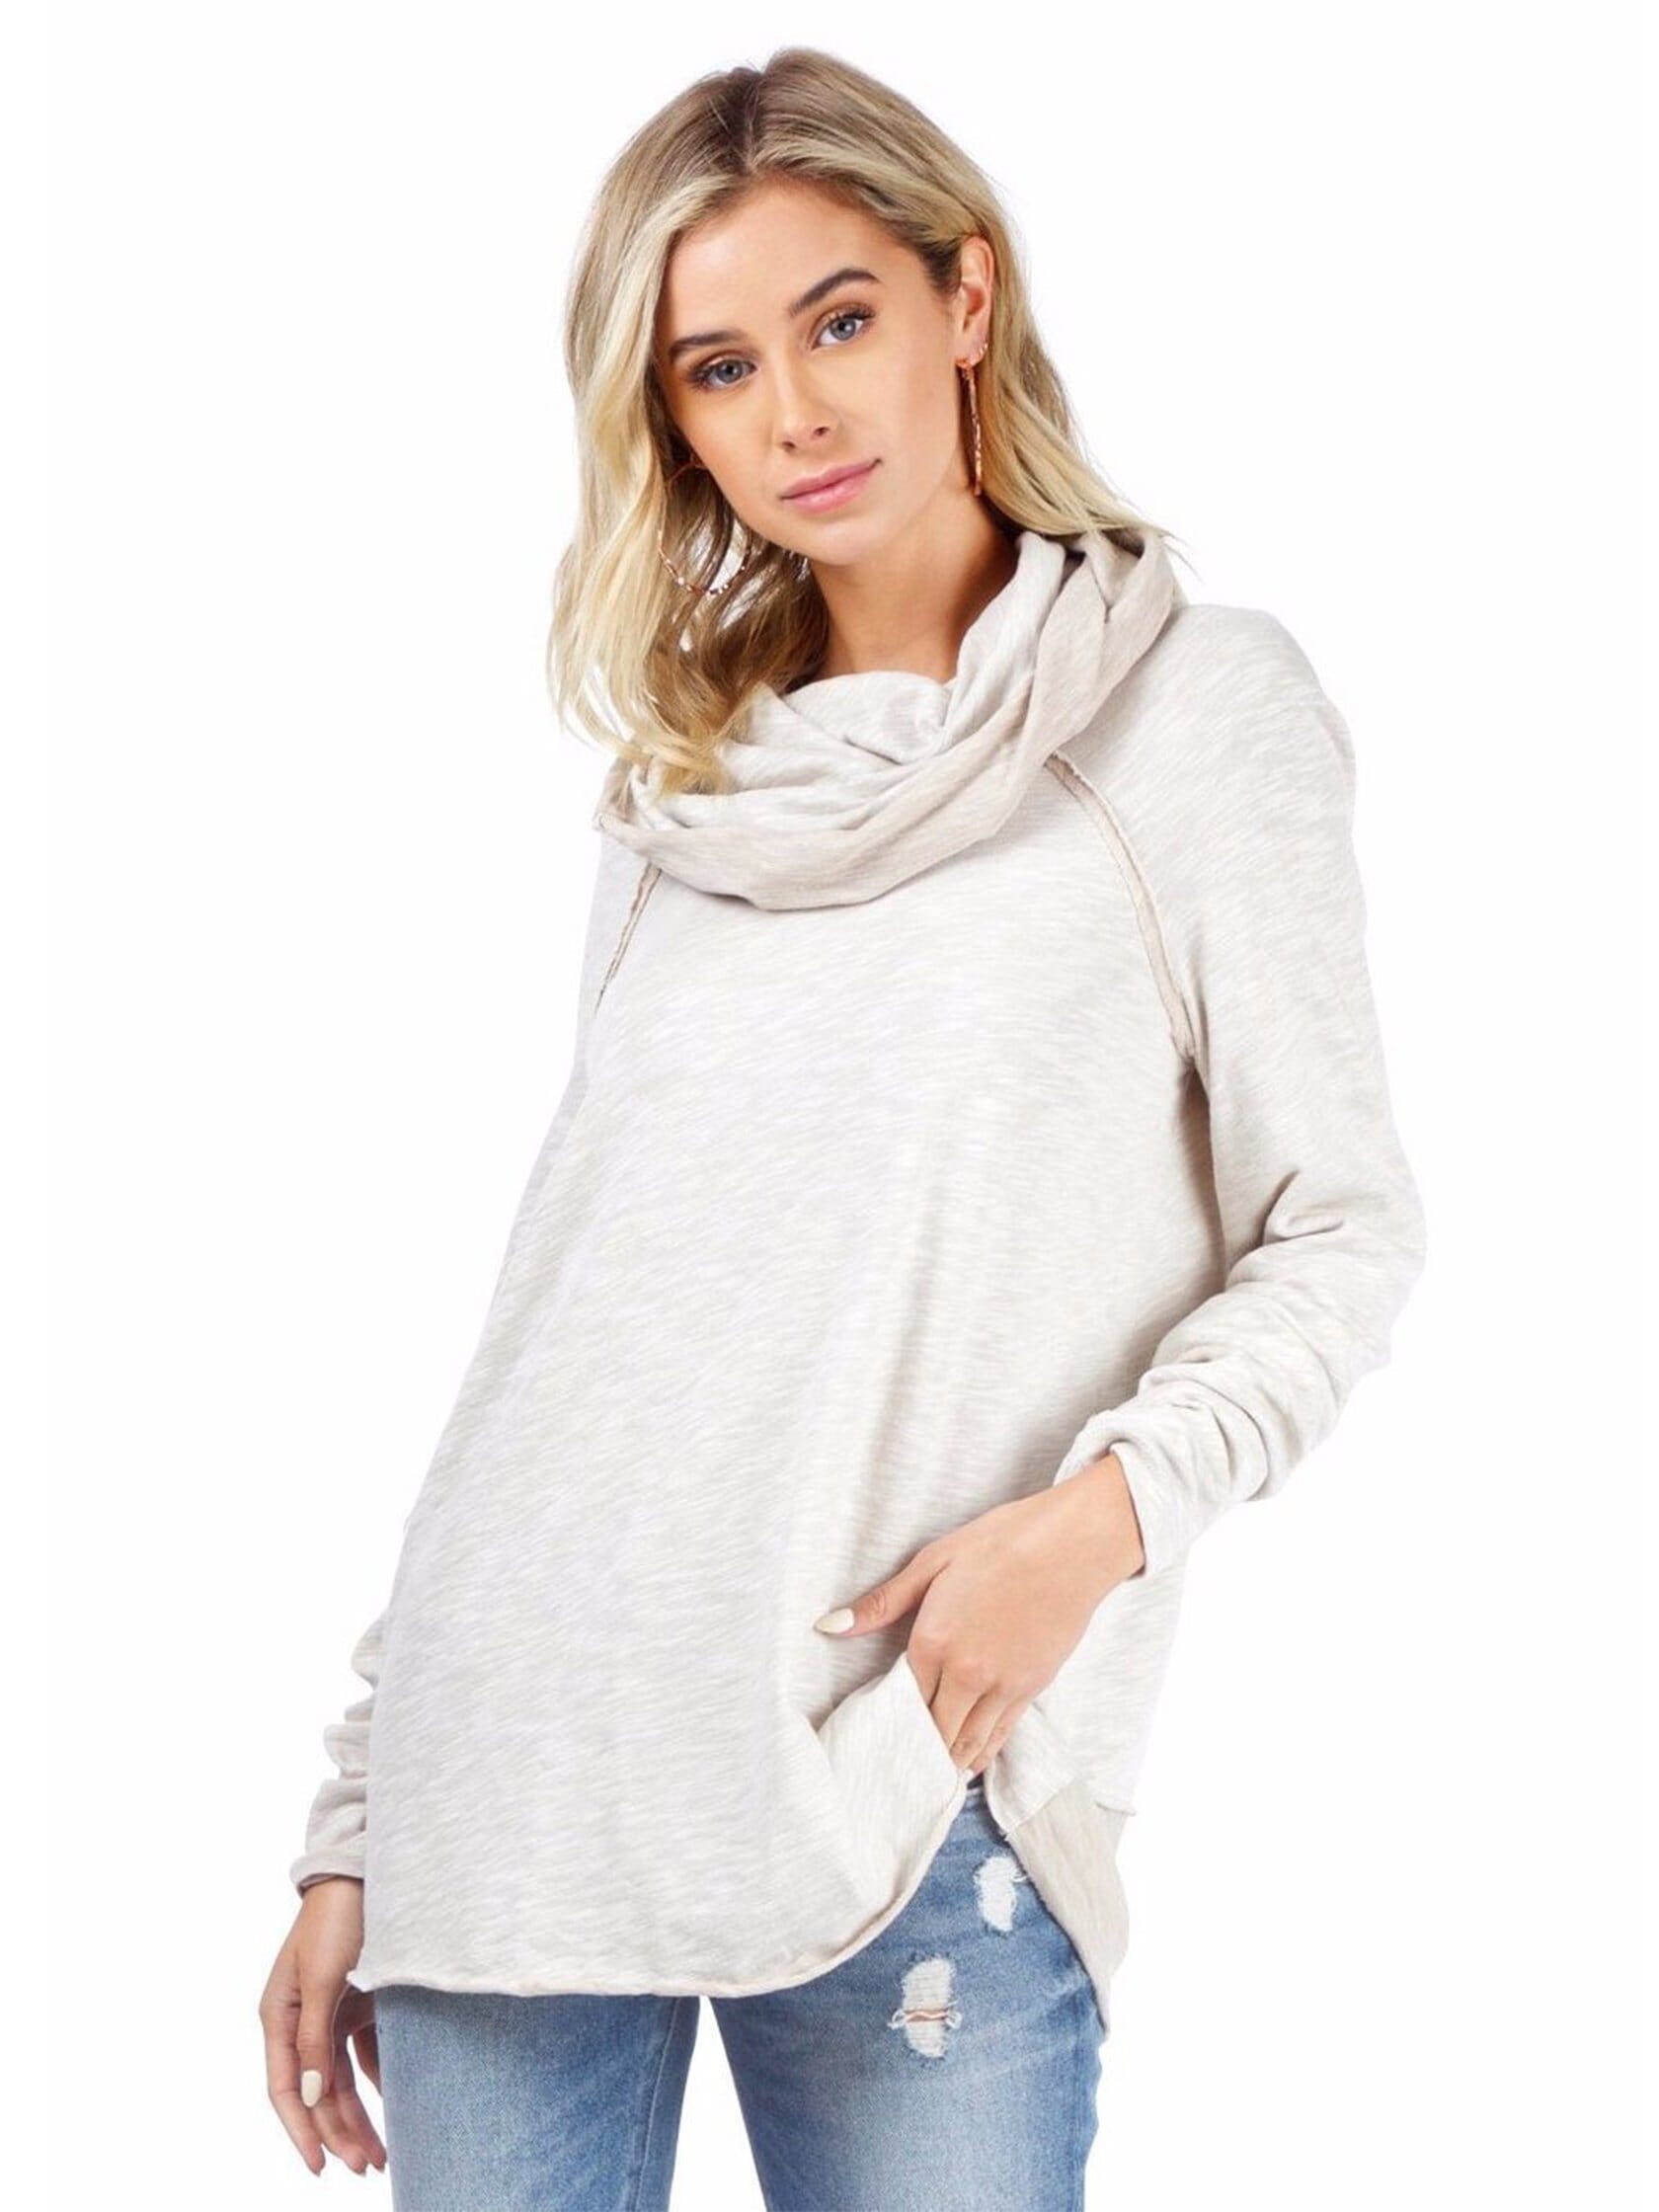 Free People | Beach Cocoon Cowl Neck Pullover in Oatmeal | FashionPass